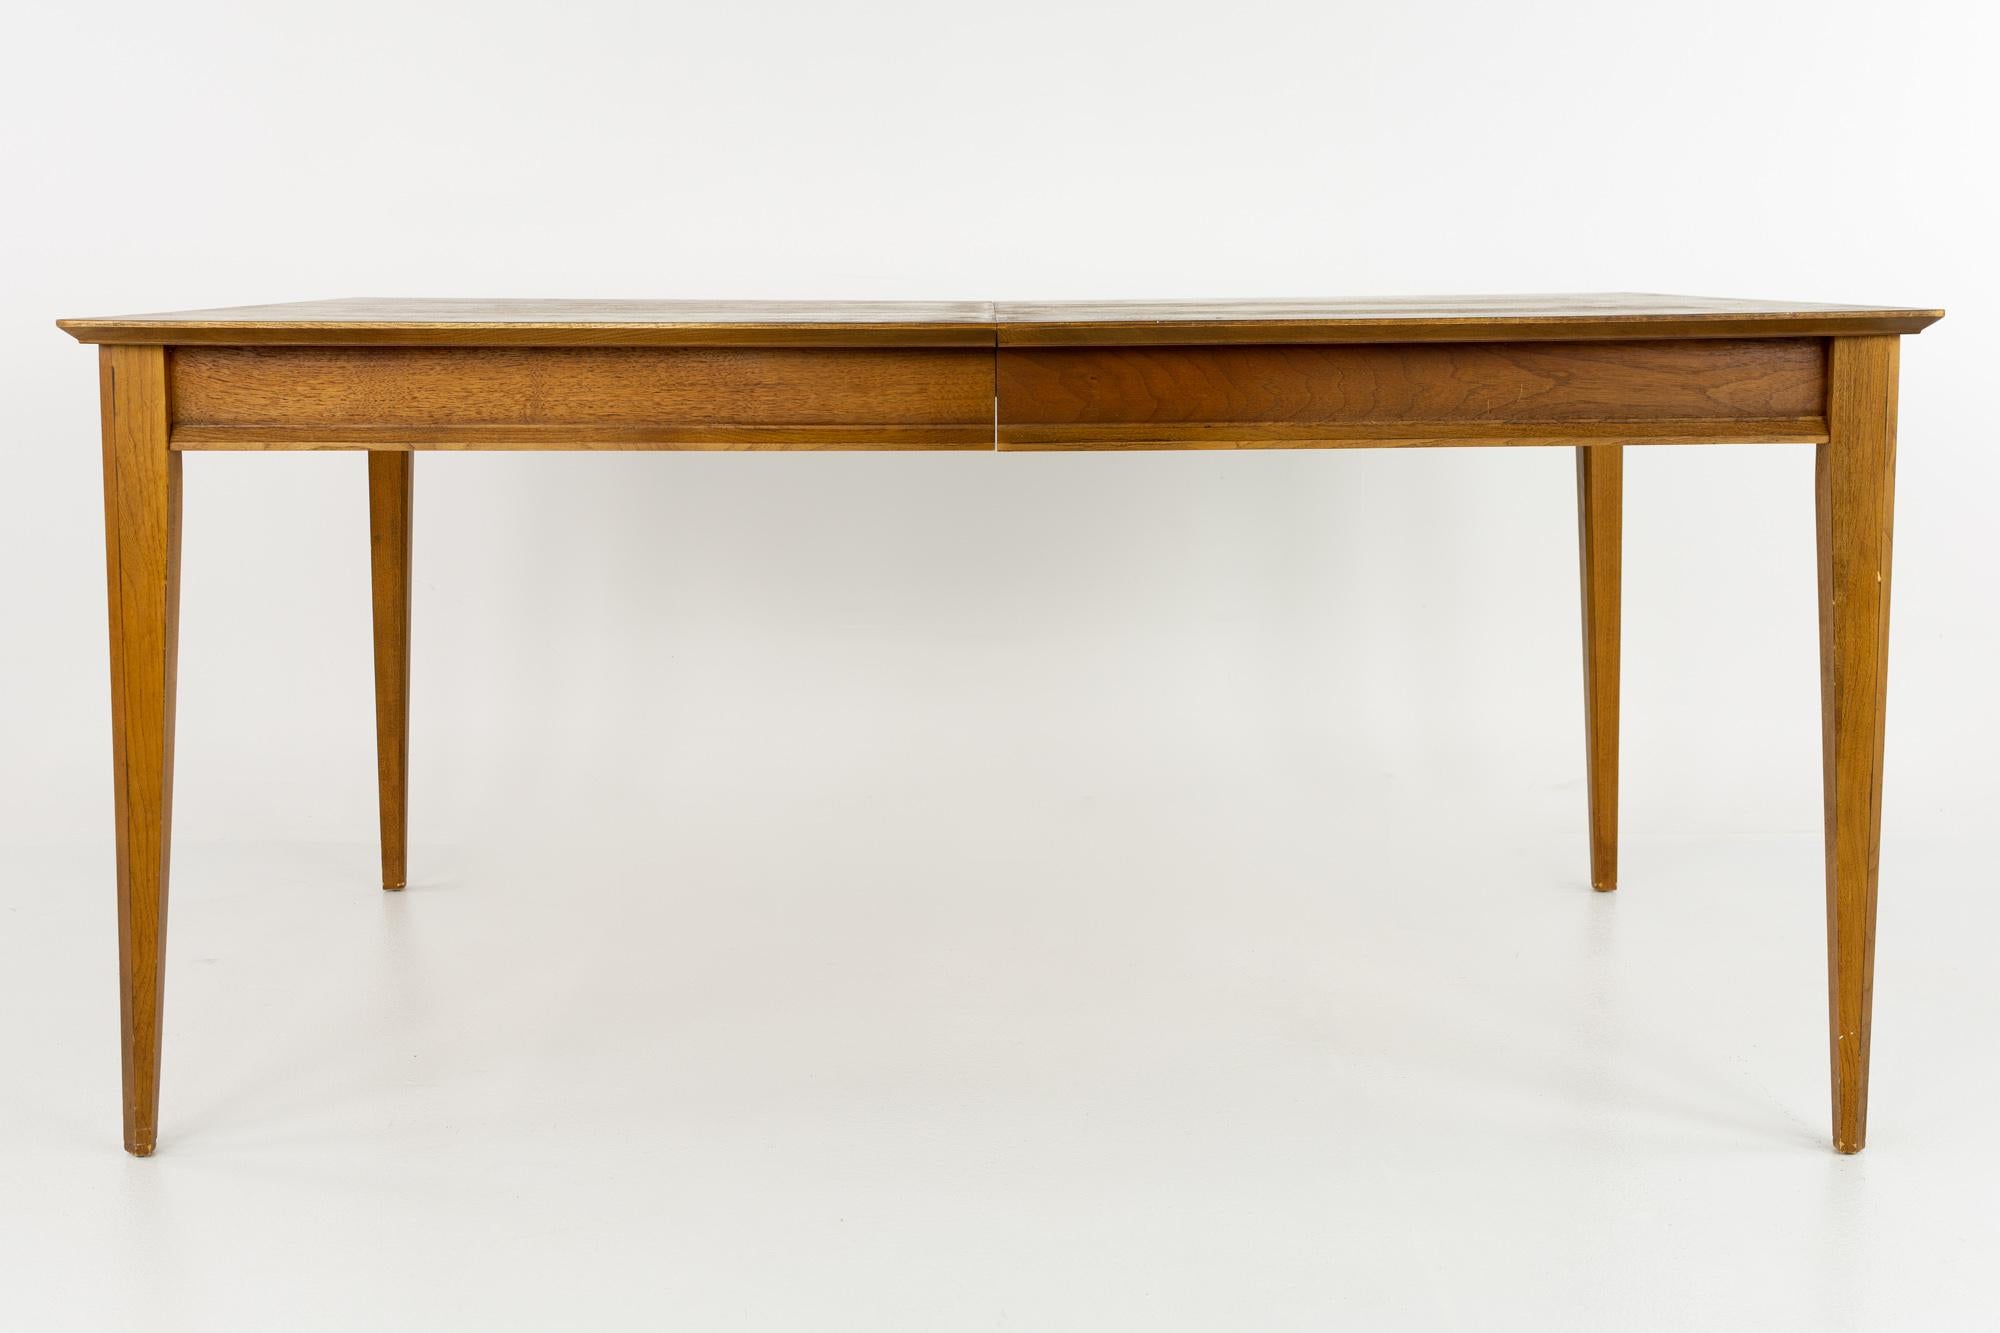 Lane first edition mid century walnut dining table with 2 leaves

This table measures: 62 wide x 40 deep x 29.25 inches high, with a chair clearance of 25 inches; the leaf is 18 inches wide, making a maximum table width of 98 inches

?All pieces